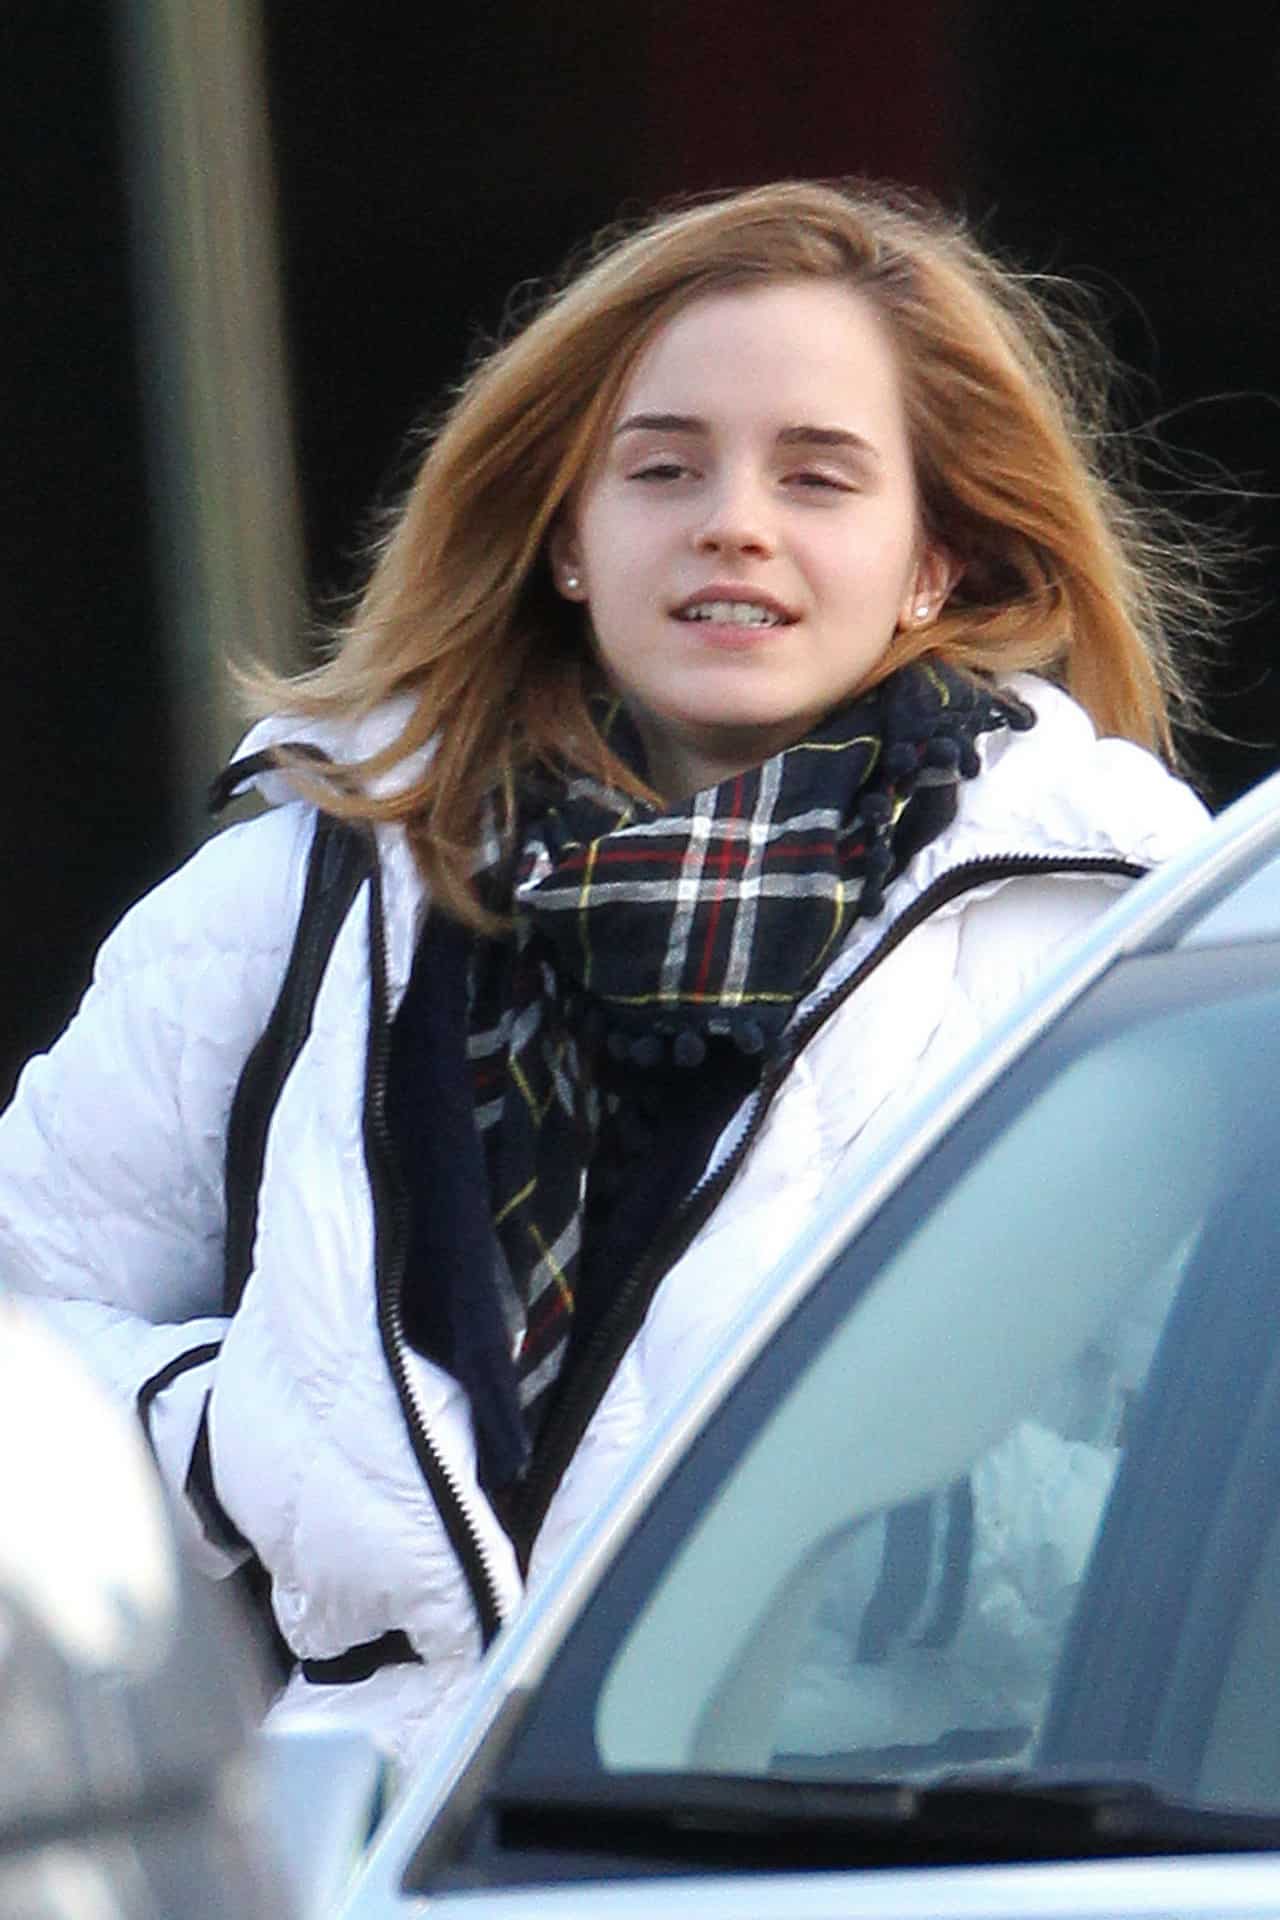 Emma Watson Styles a White Puffer Jacket with Tight Jeans and Fringe Boots